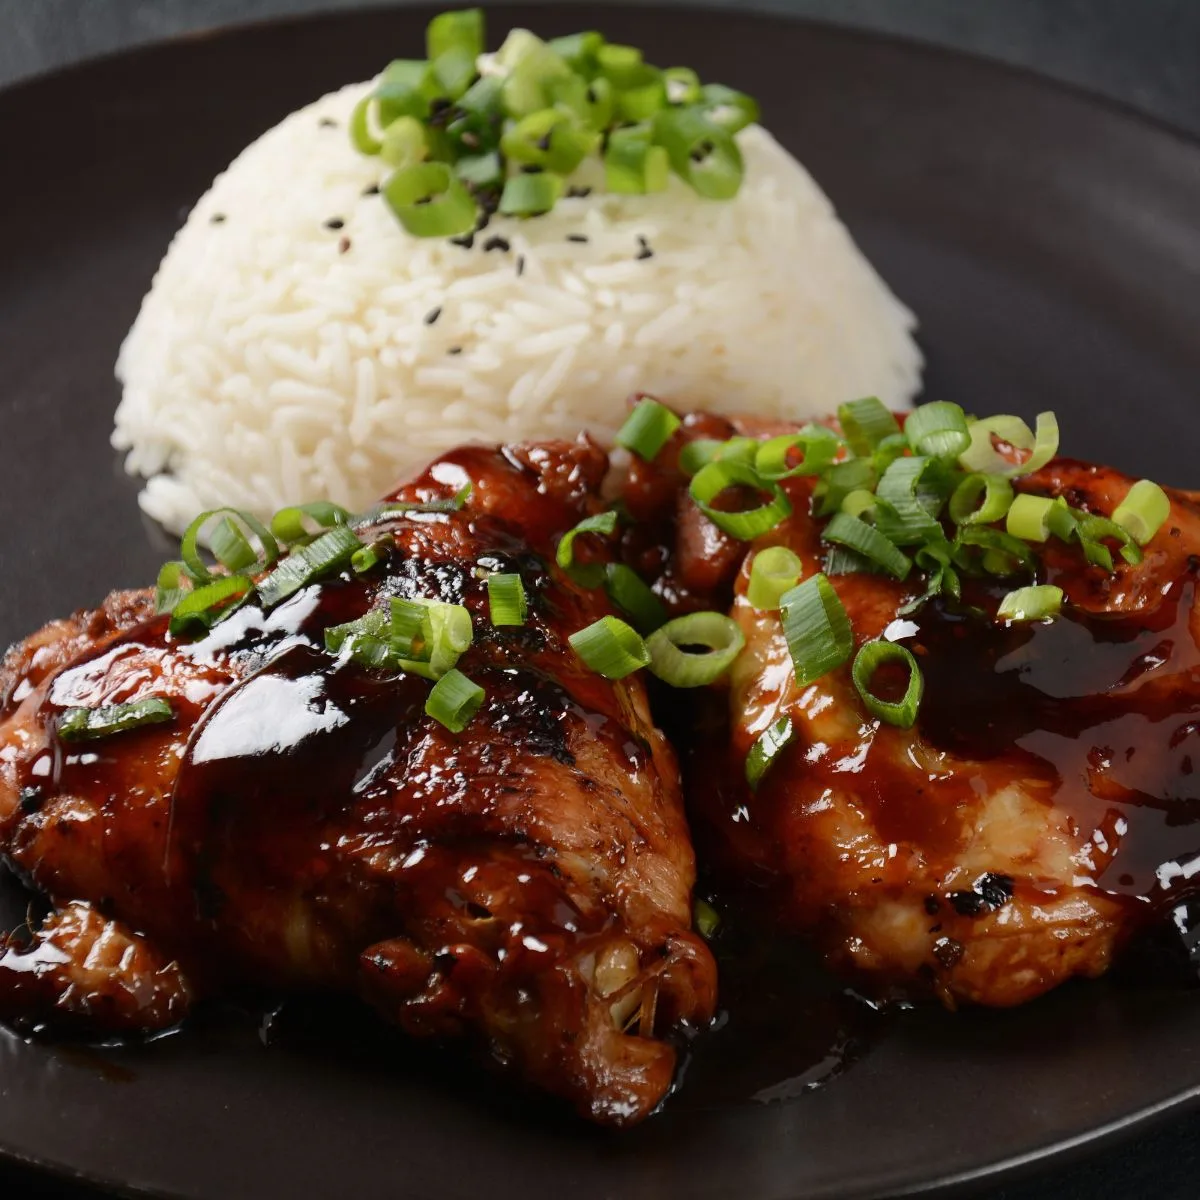 Chicken thighs cooked in adobo sauce with rice